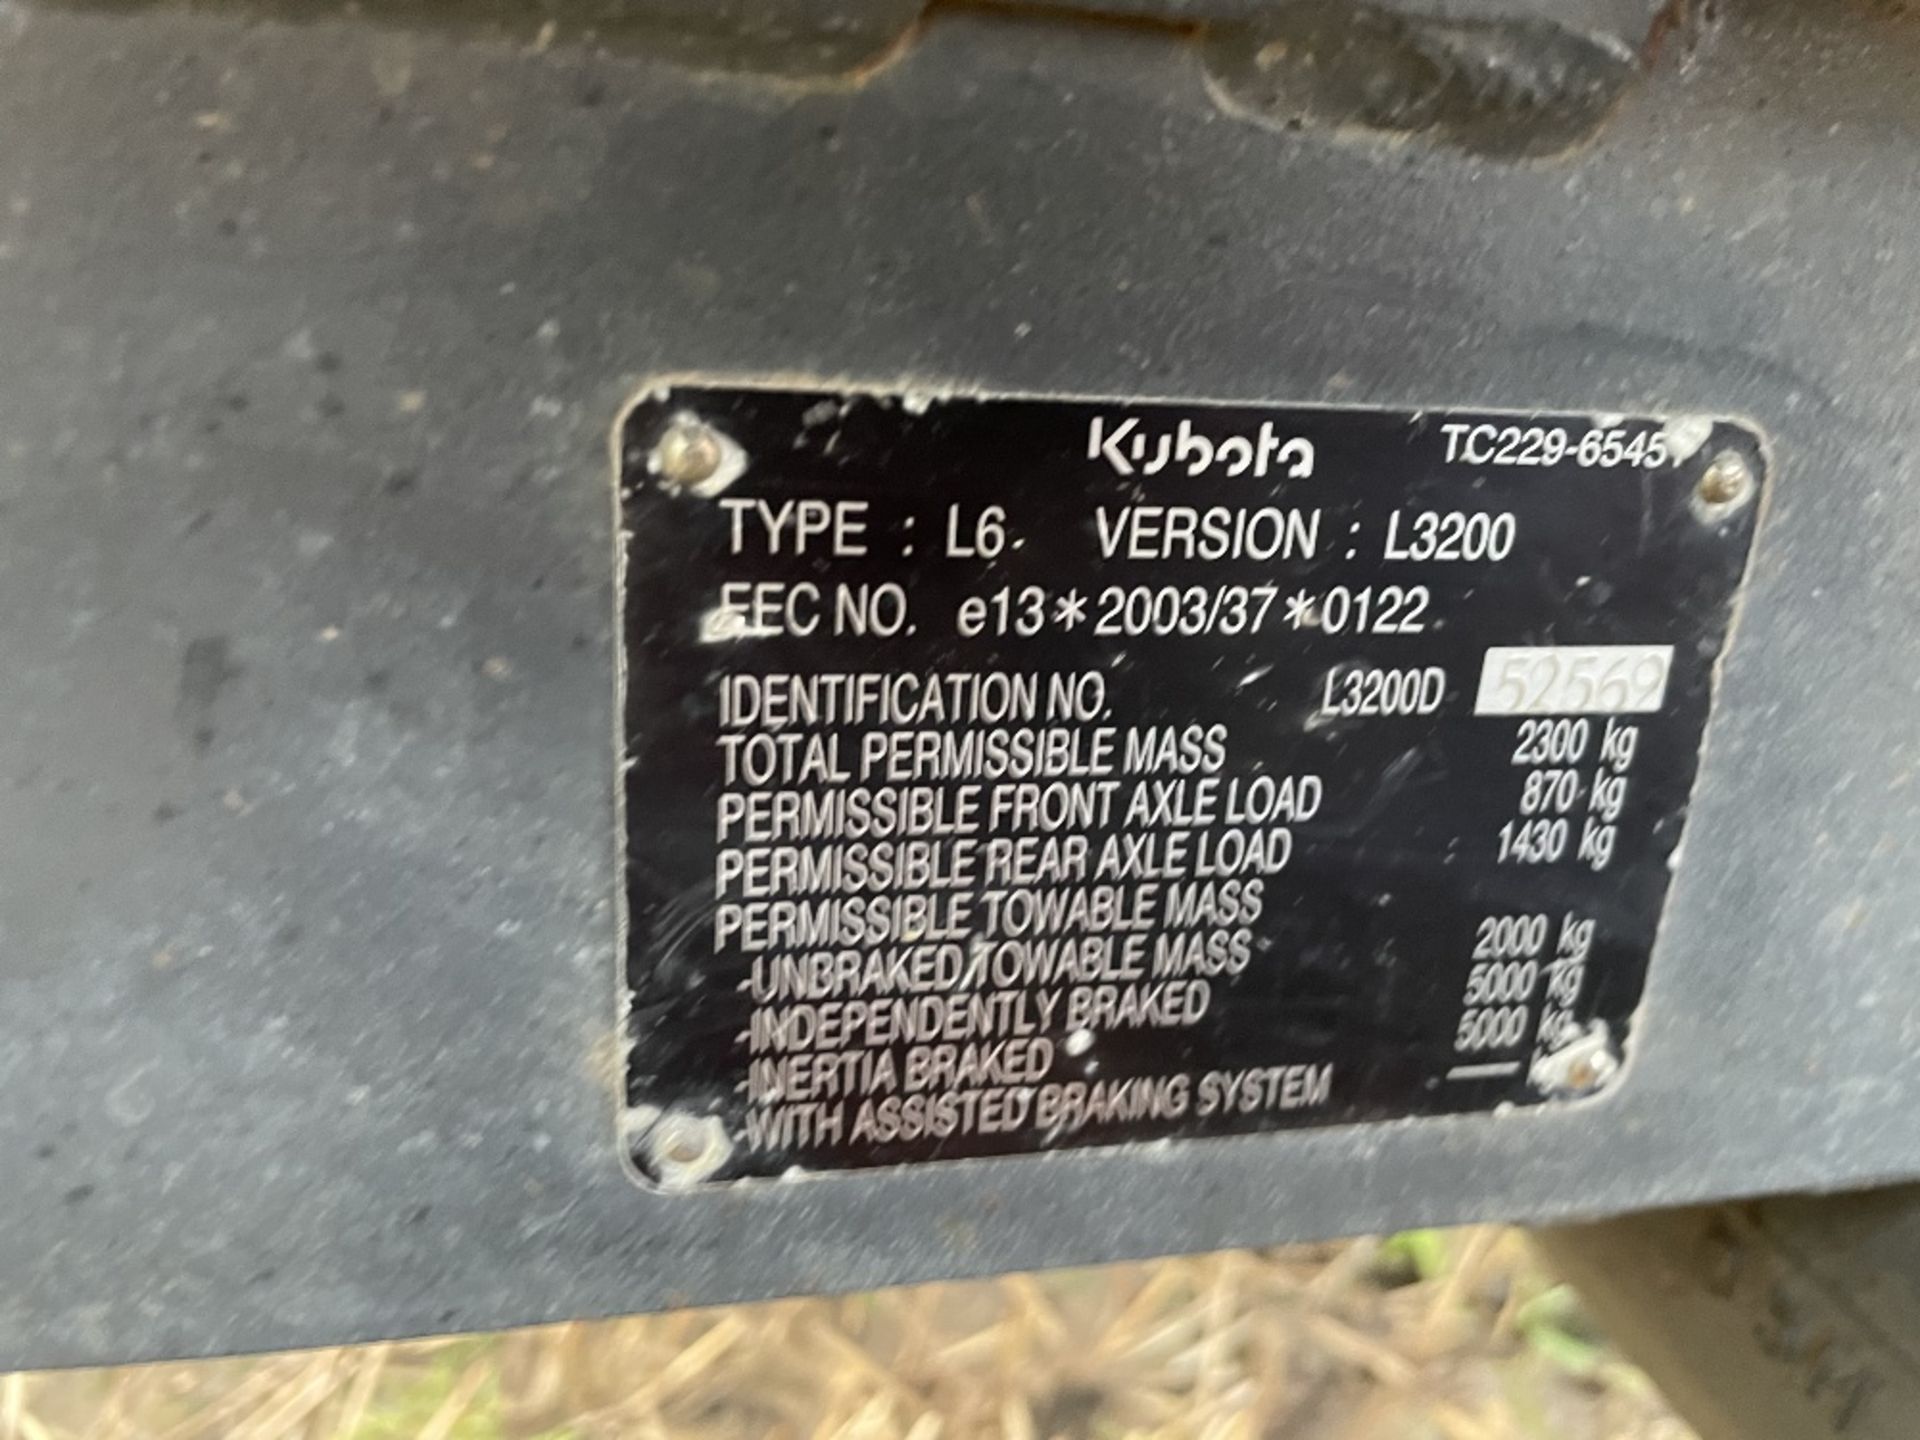 Kubota L3200 4Wd Compact Tractor - AU13 CYC - 2013 - 3 point linkage, PTO, approx. 380 hours. - Image 9 of 9